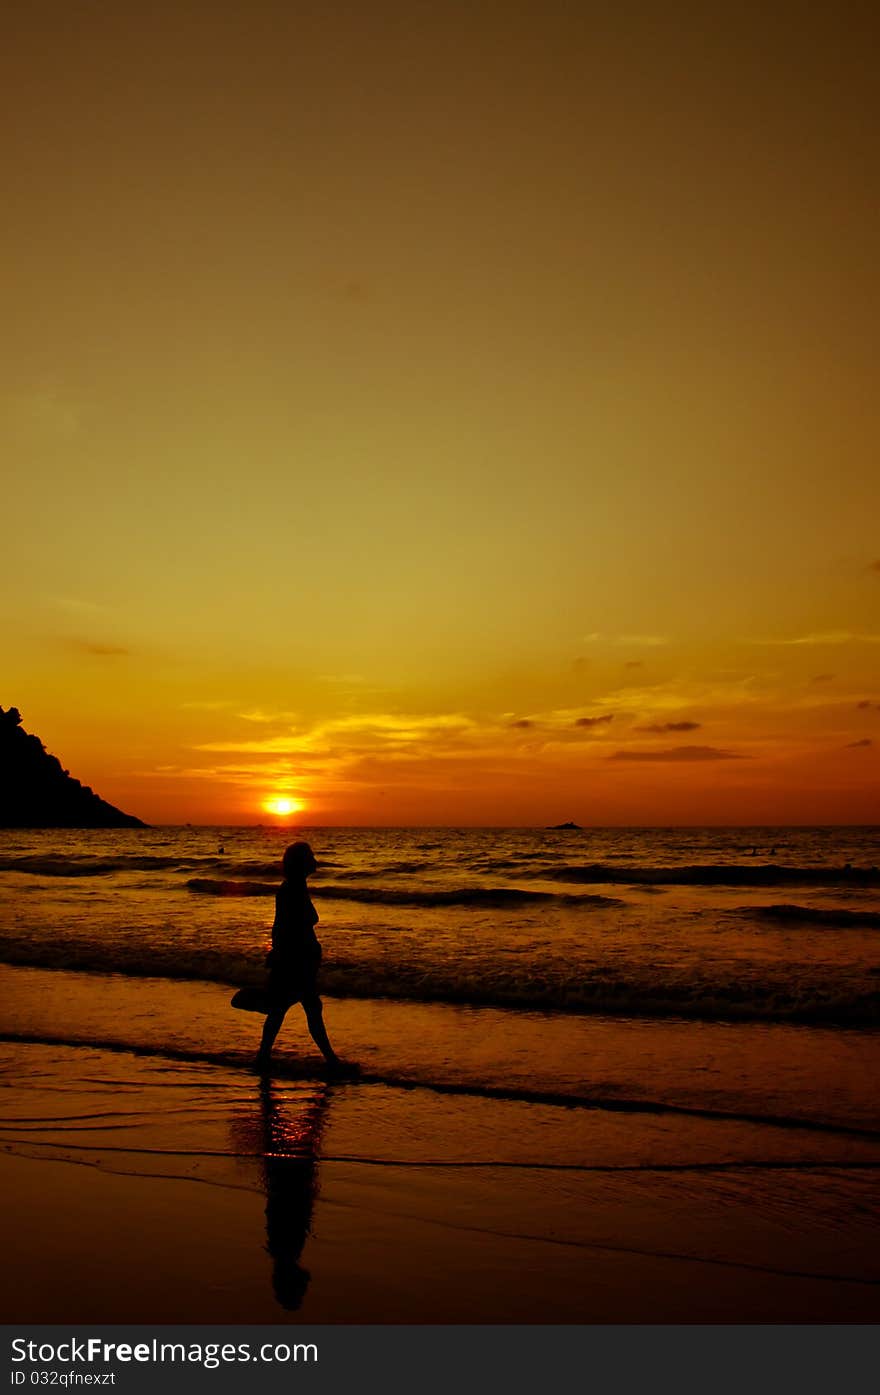 The sun sets in the sea with a silhouette of a girl walking at the coastline. The sun sets in the sea with a silhouette of a girl walking at the coastline.